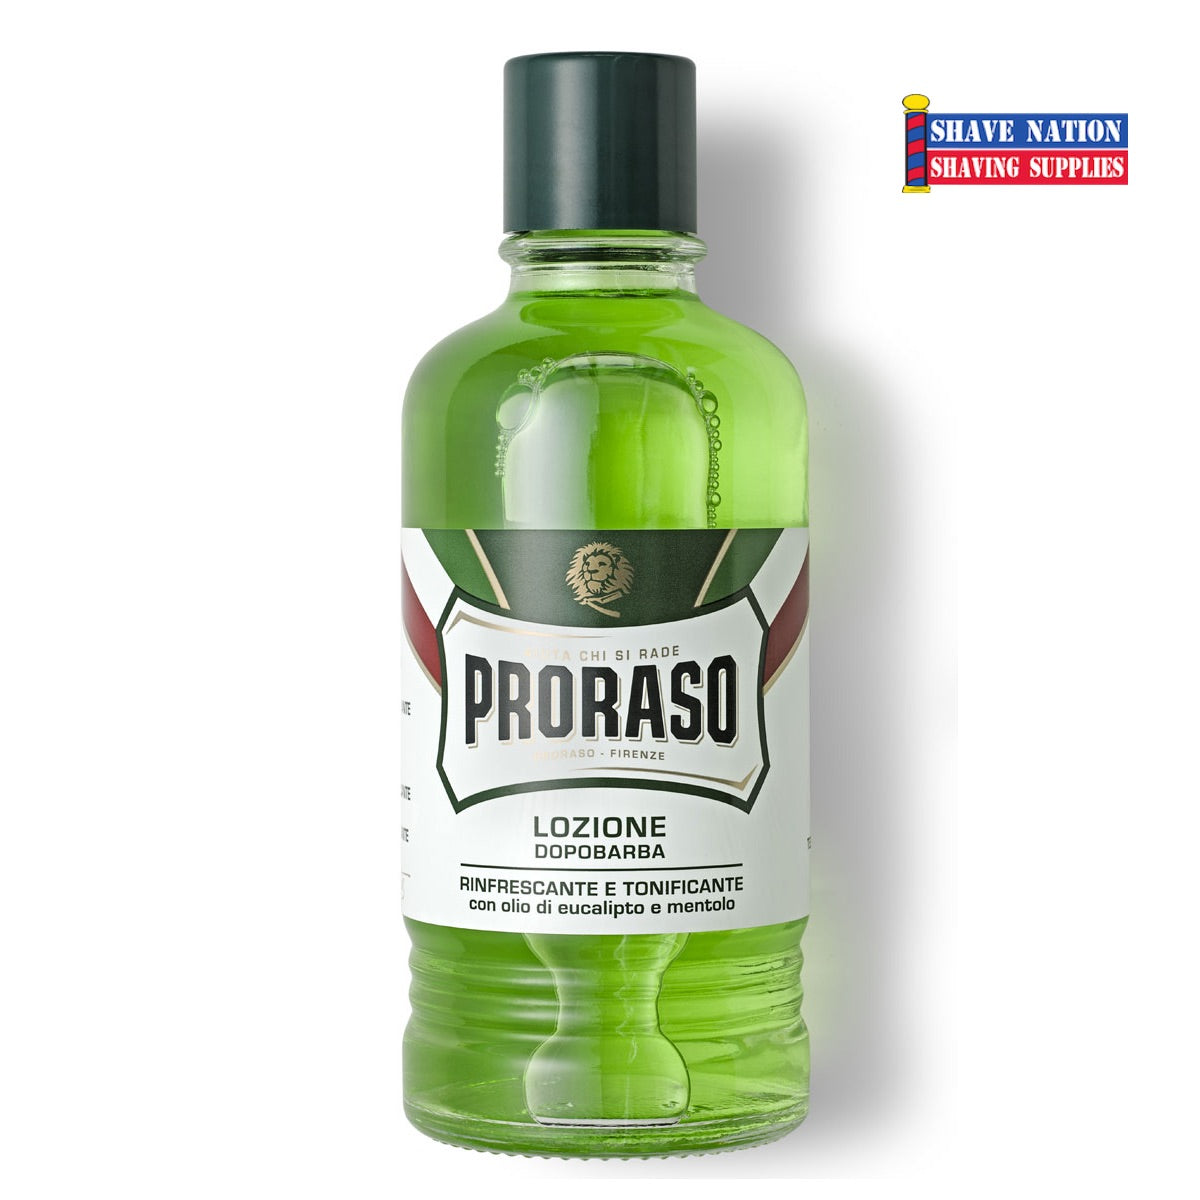 Proraso Large Green Aftershave Lotion for PROFESSIONAL Use Shave Nation Shaving Supplies®